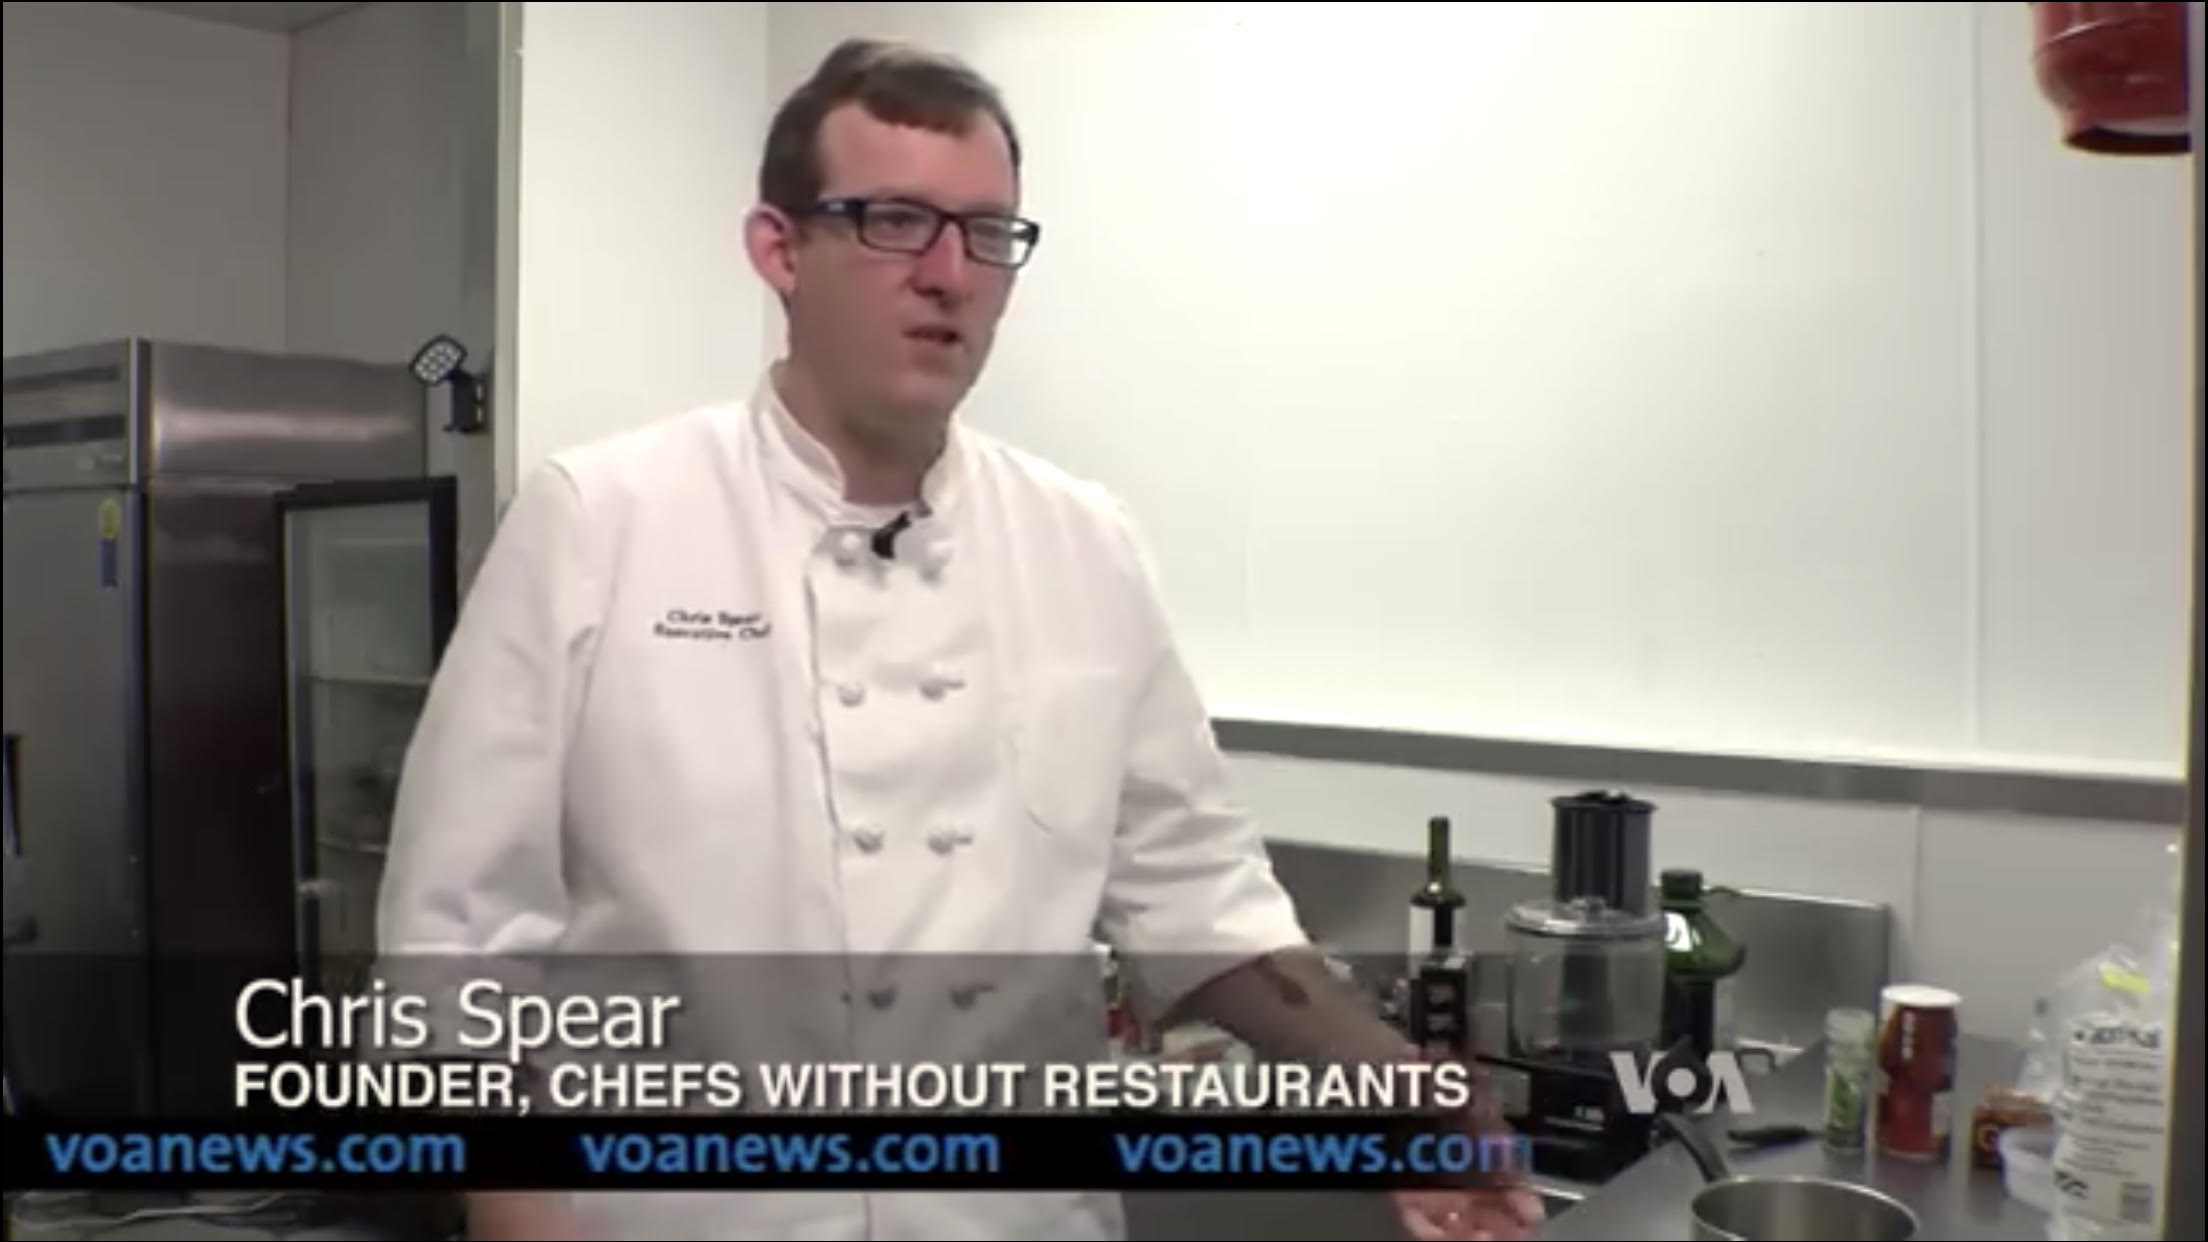 frederick maryland personal chef and caterer chris spear talks to voice of america news about his culinary networking group chefs without restaurants